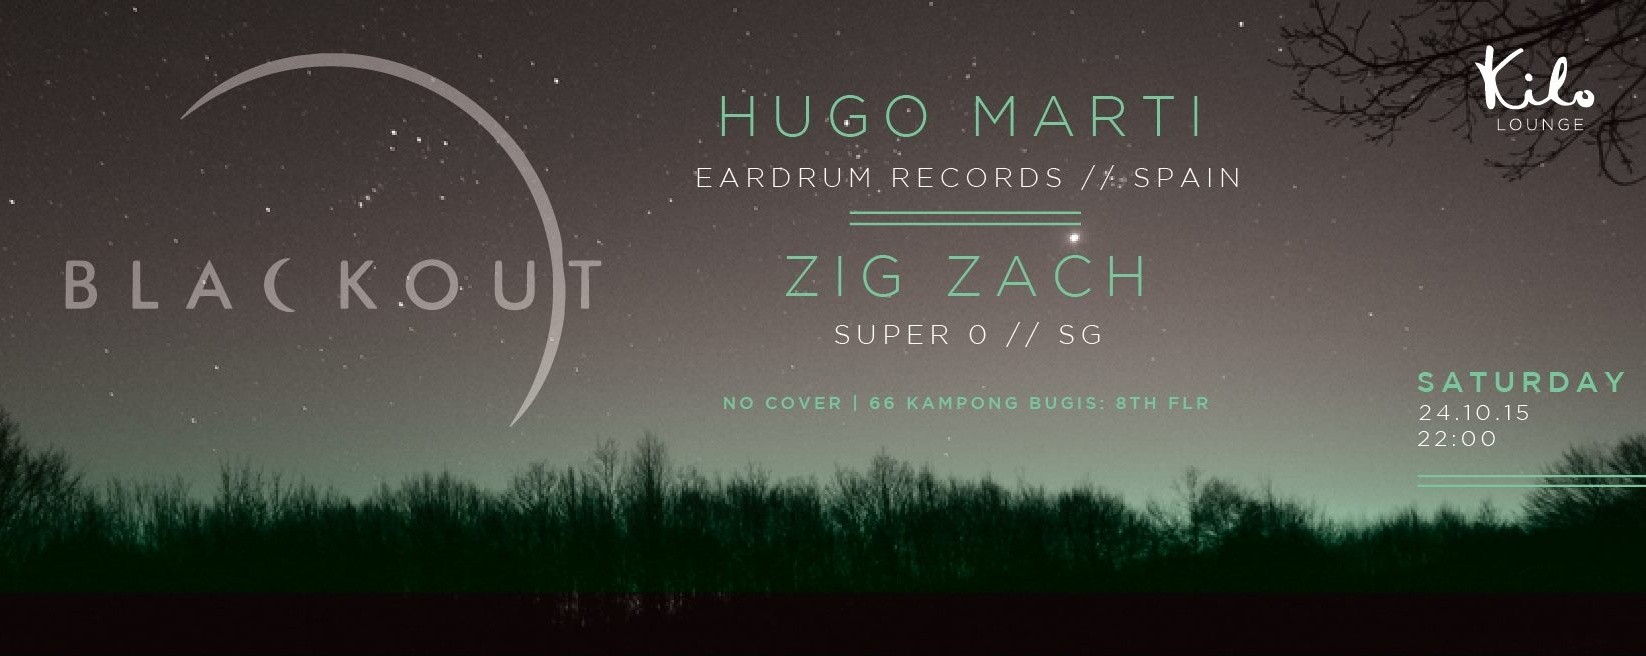 BLACKOUT with HUGO MARTI (SPAIN)